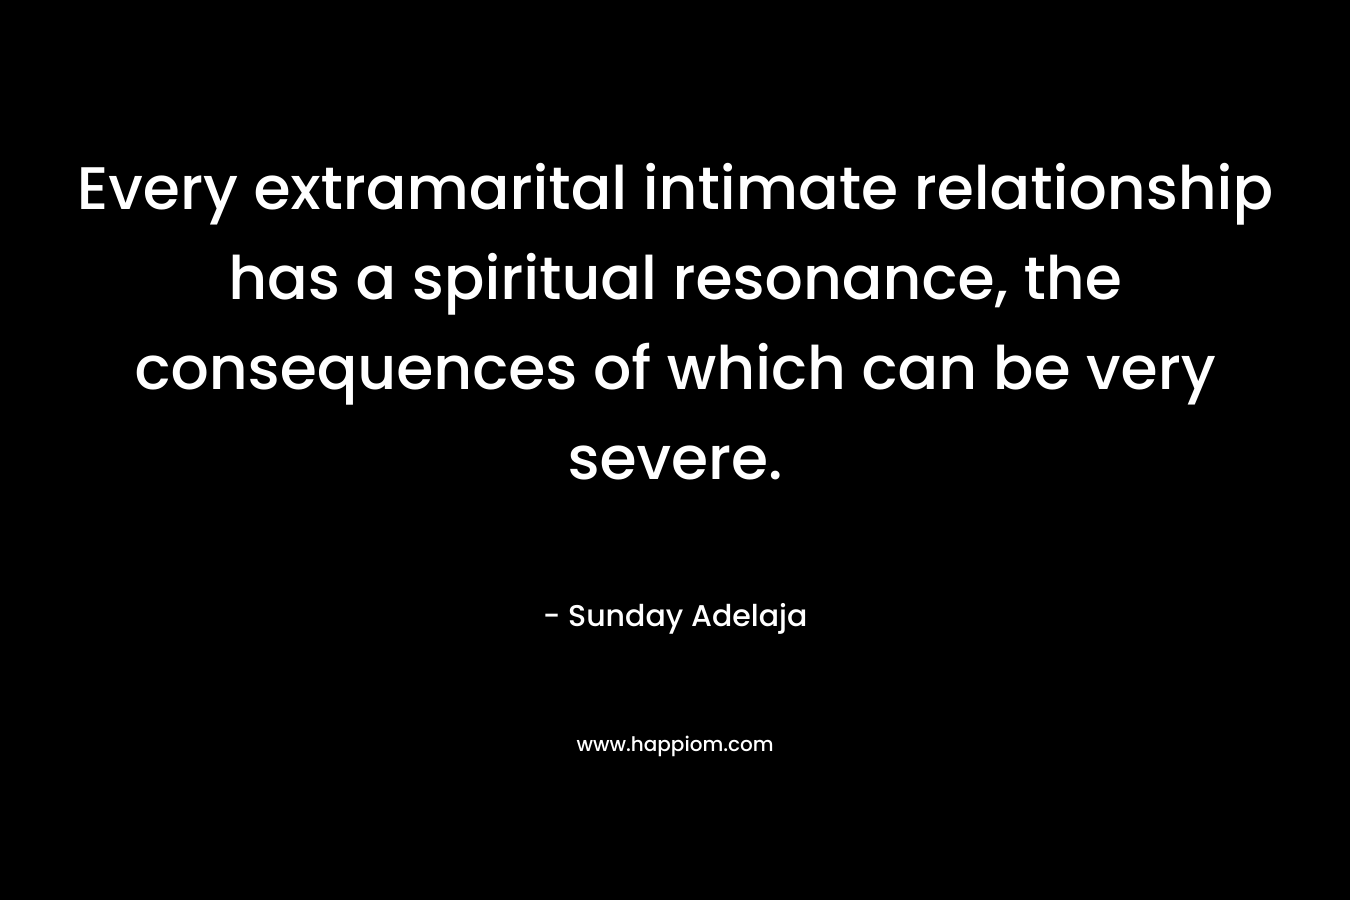 Every extramarital intimate relationship has a spiritual resonance, the consequences of which can be very severe. – Sunday Adelaja